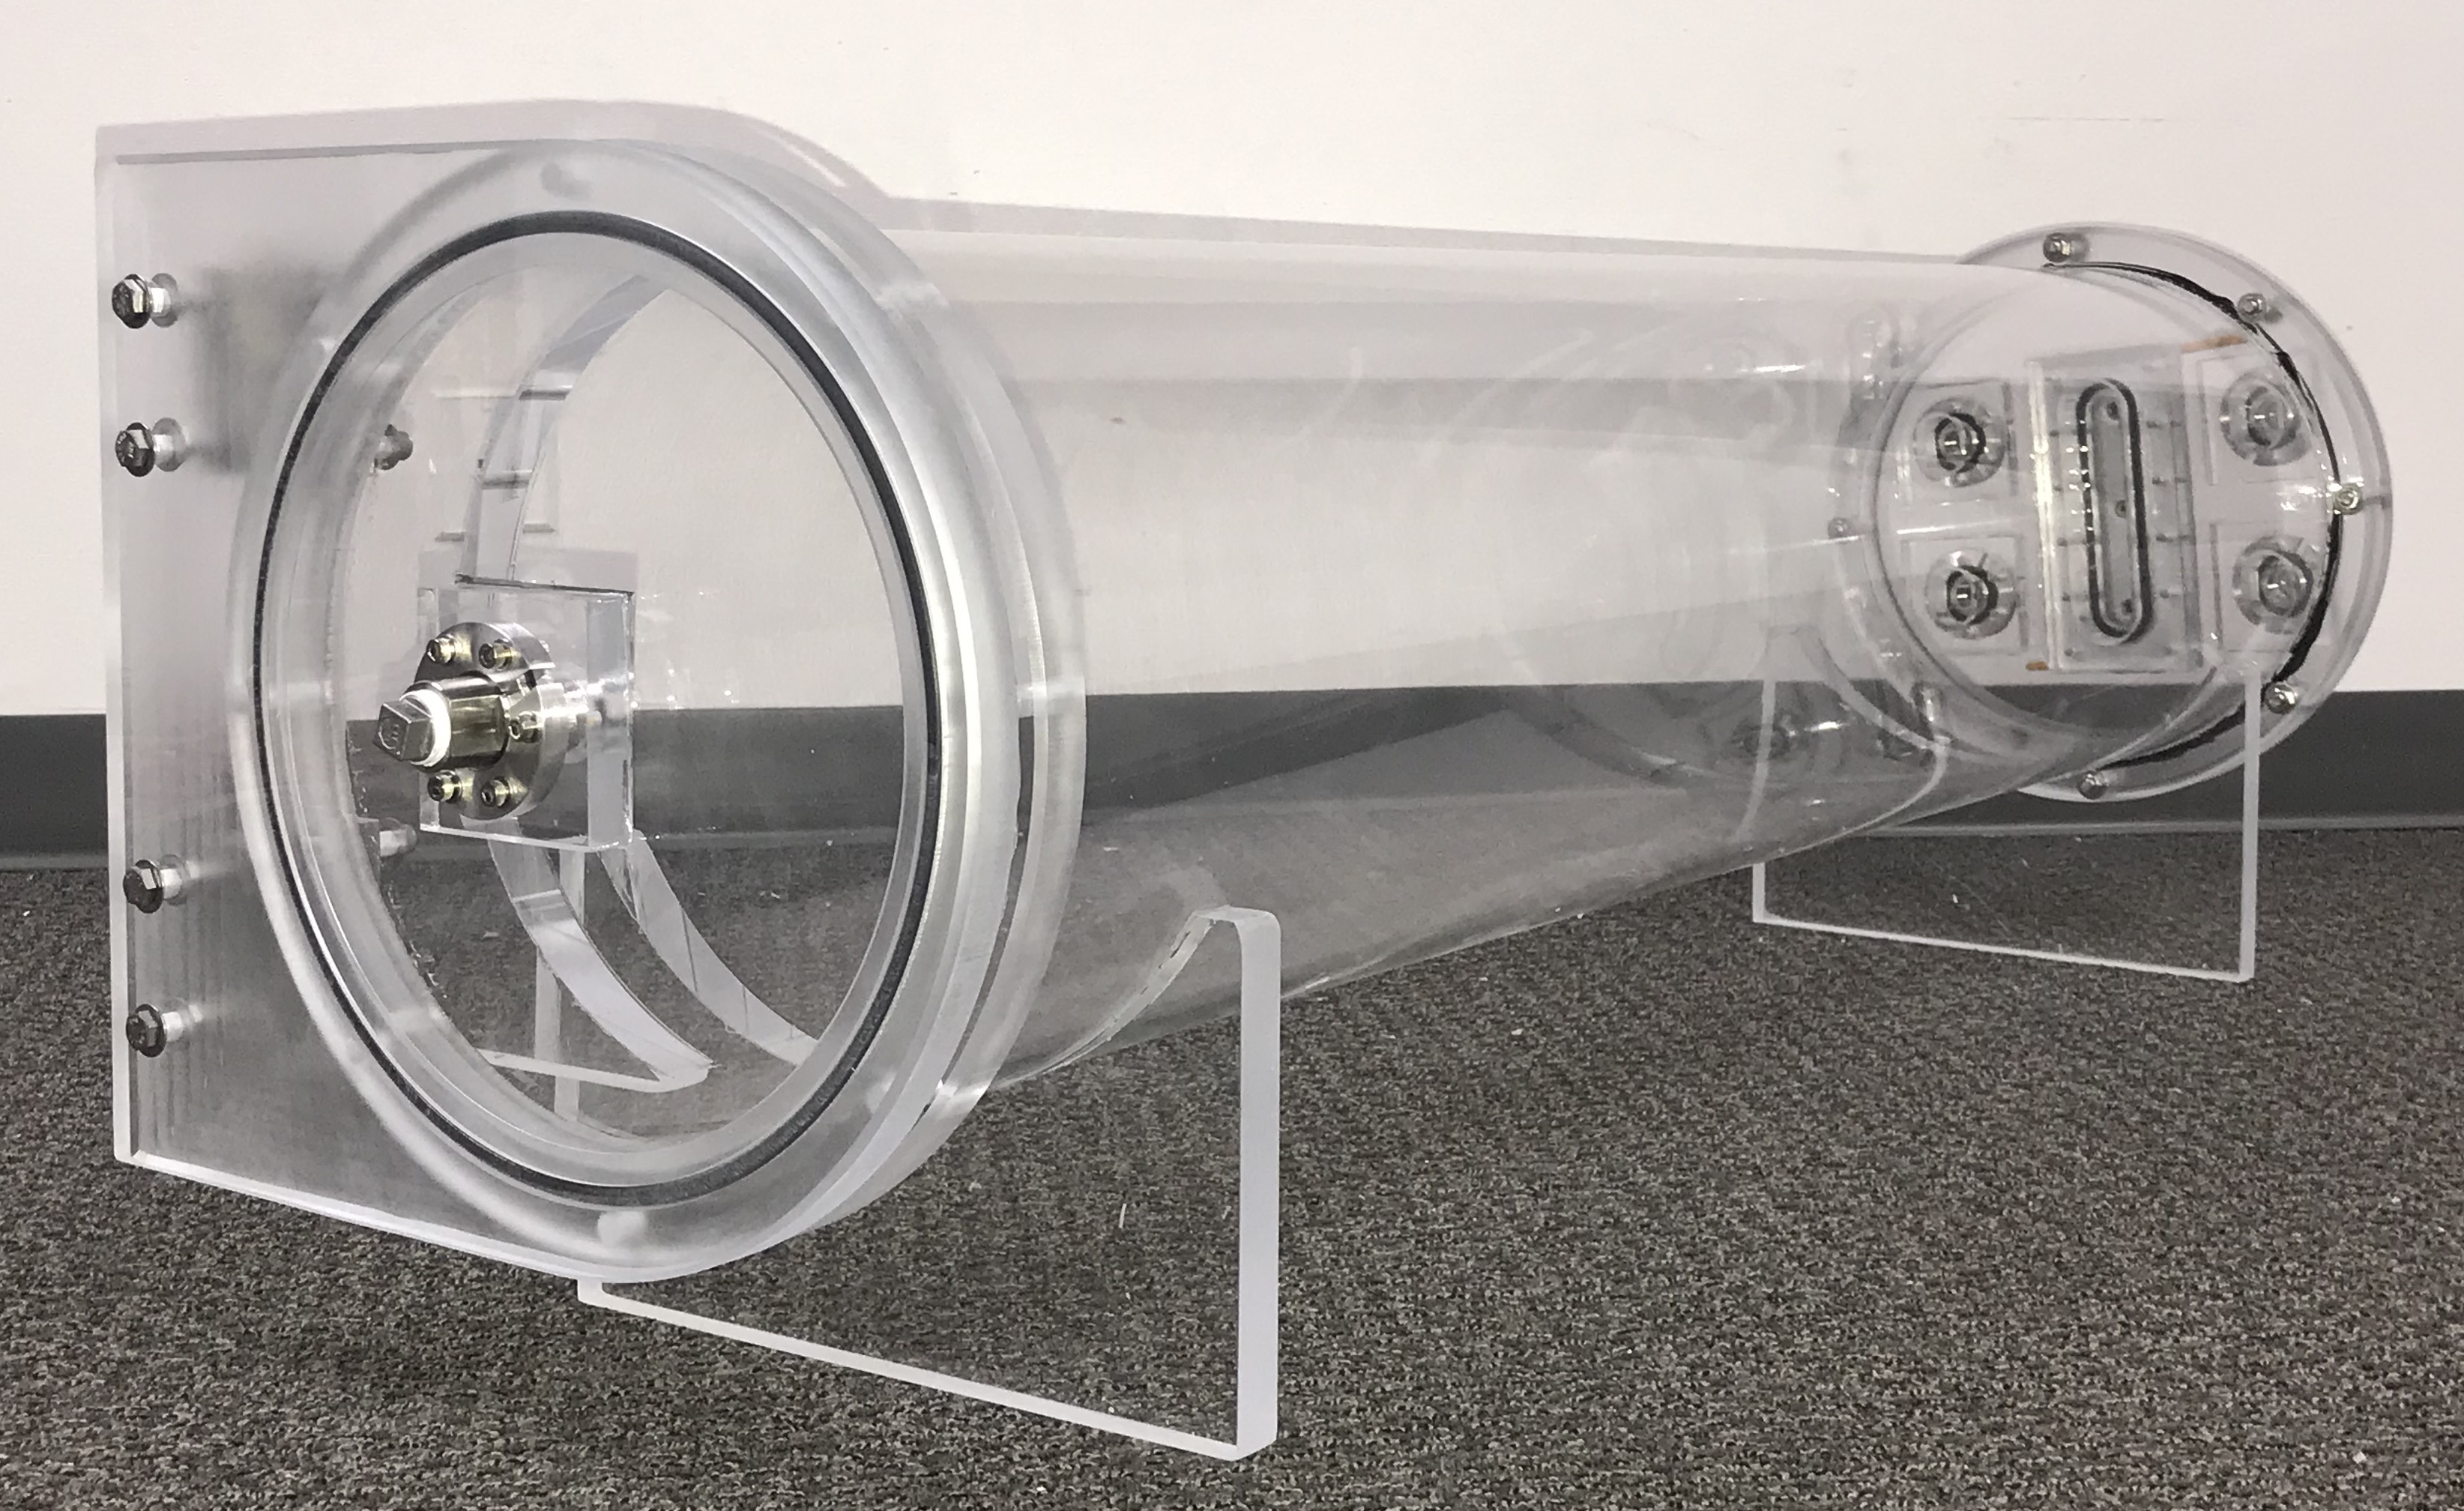 https://www.sanatron.com/products/images/custom-vacuum-chamber-cylindrical-made-from-acrylic.jpg